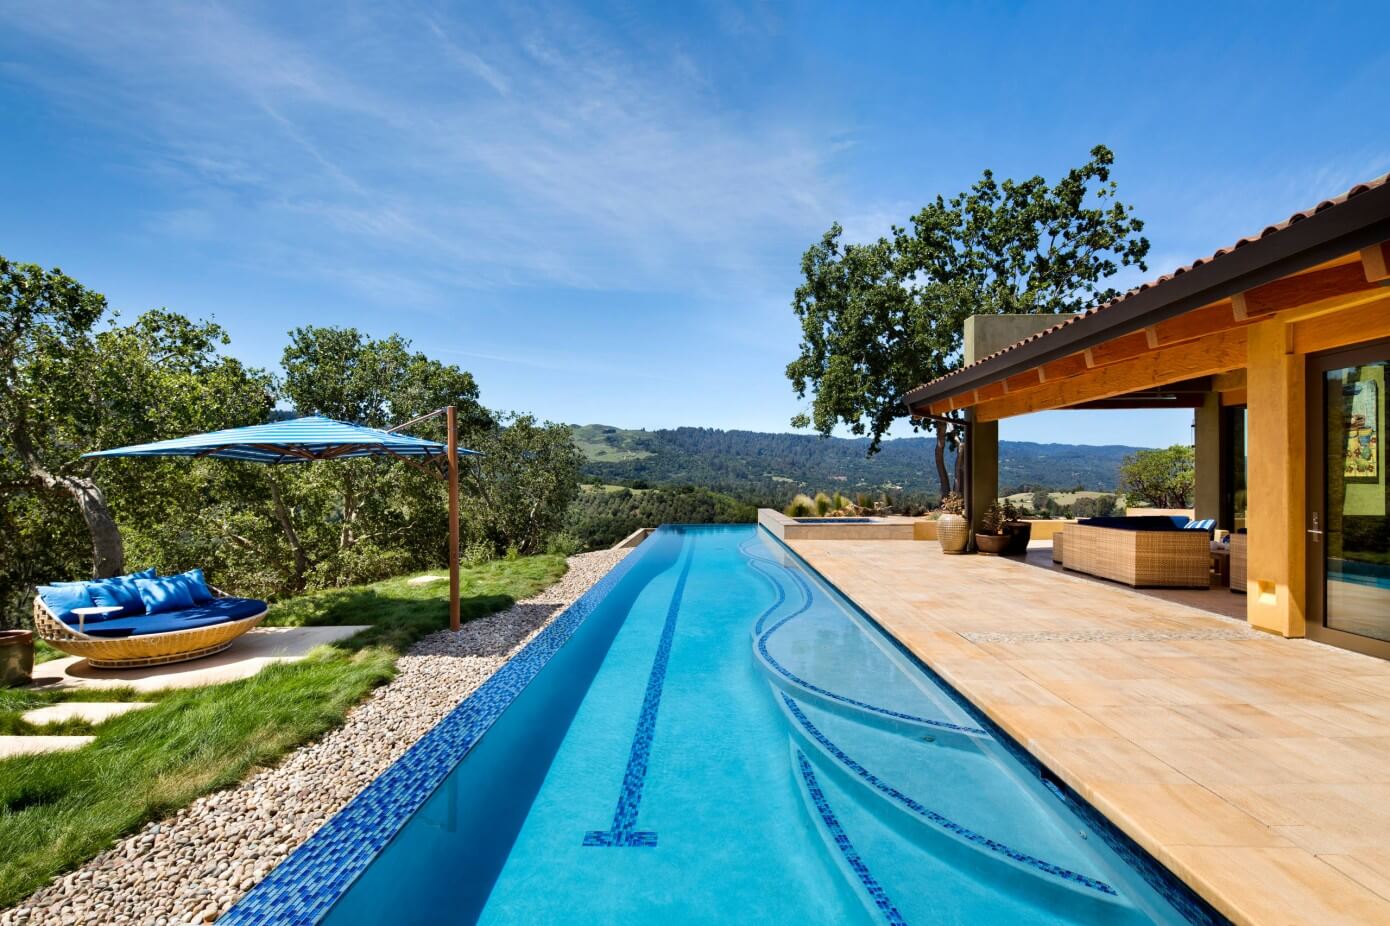 Palo Alto Hills by Stoecker and Northway Architects